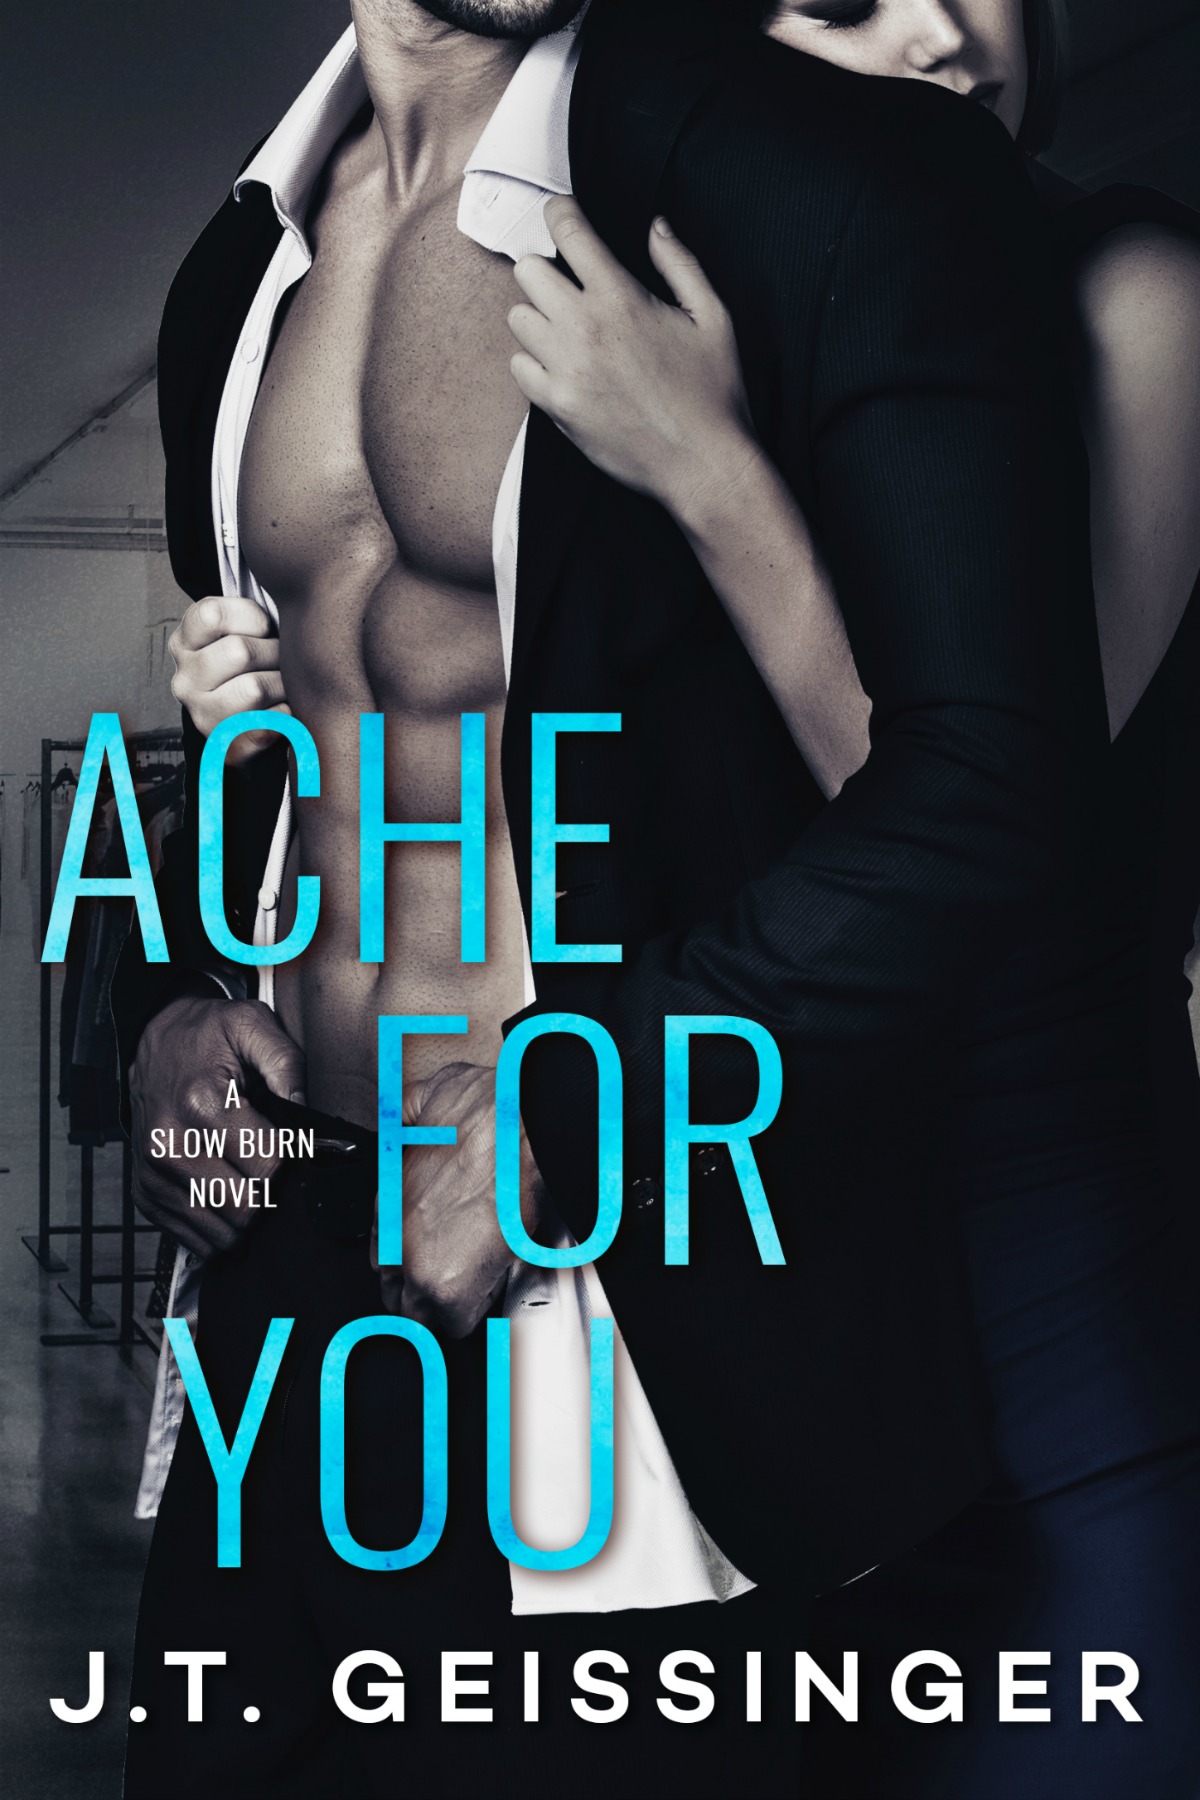 Ache for You by J. T. Geissinger [Blog Tour]